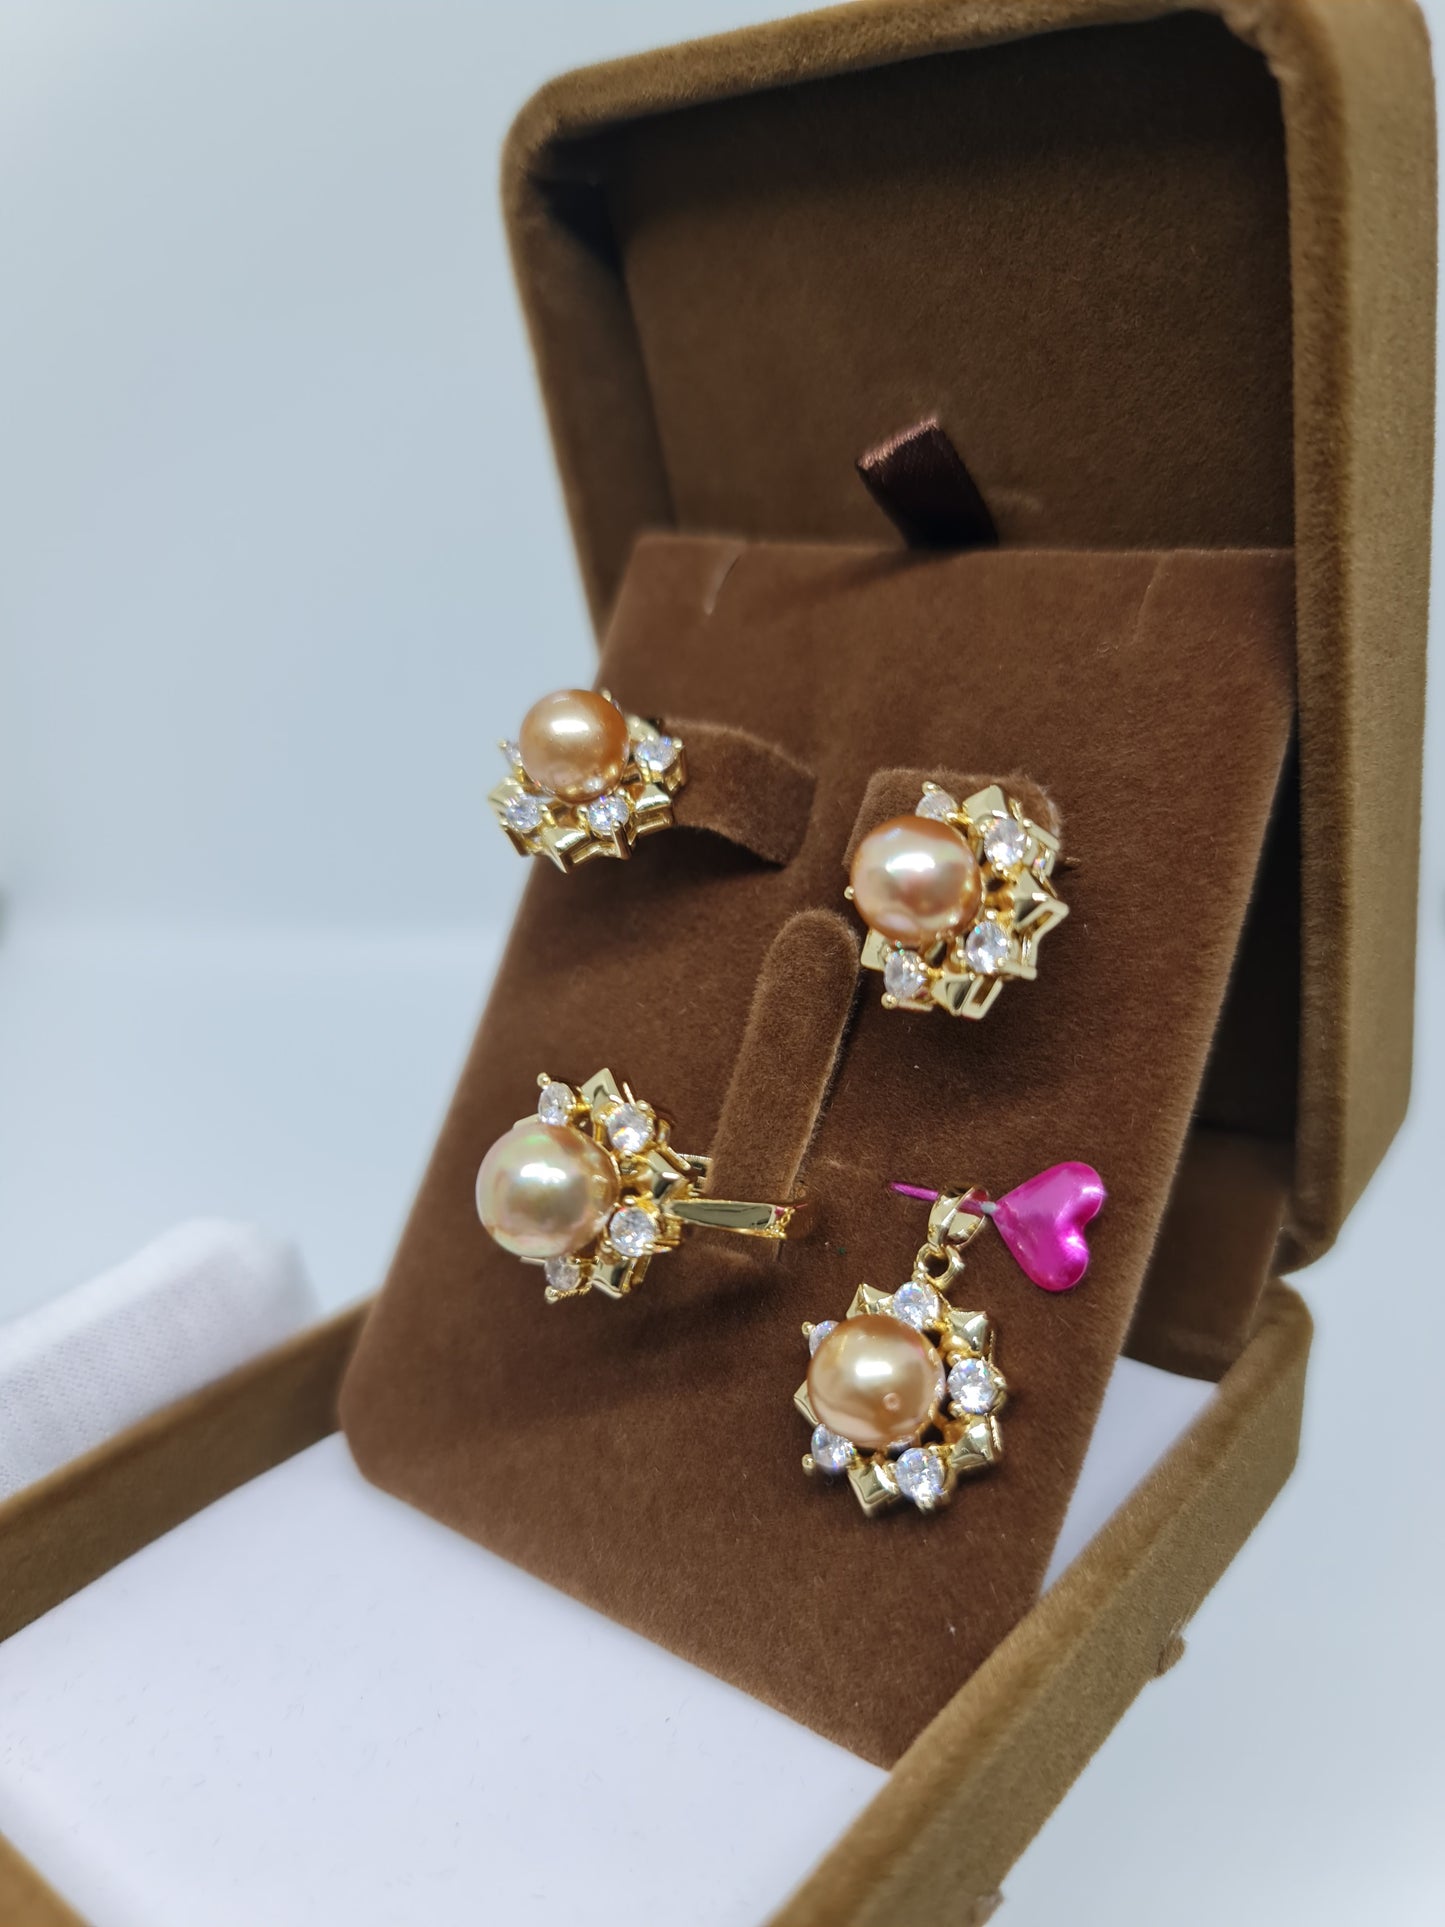 8mm to 8.8mm Deep Golden South Sea Pearls Set in Plated Settings